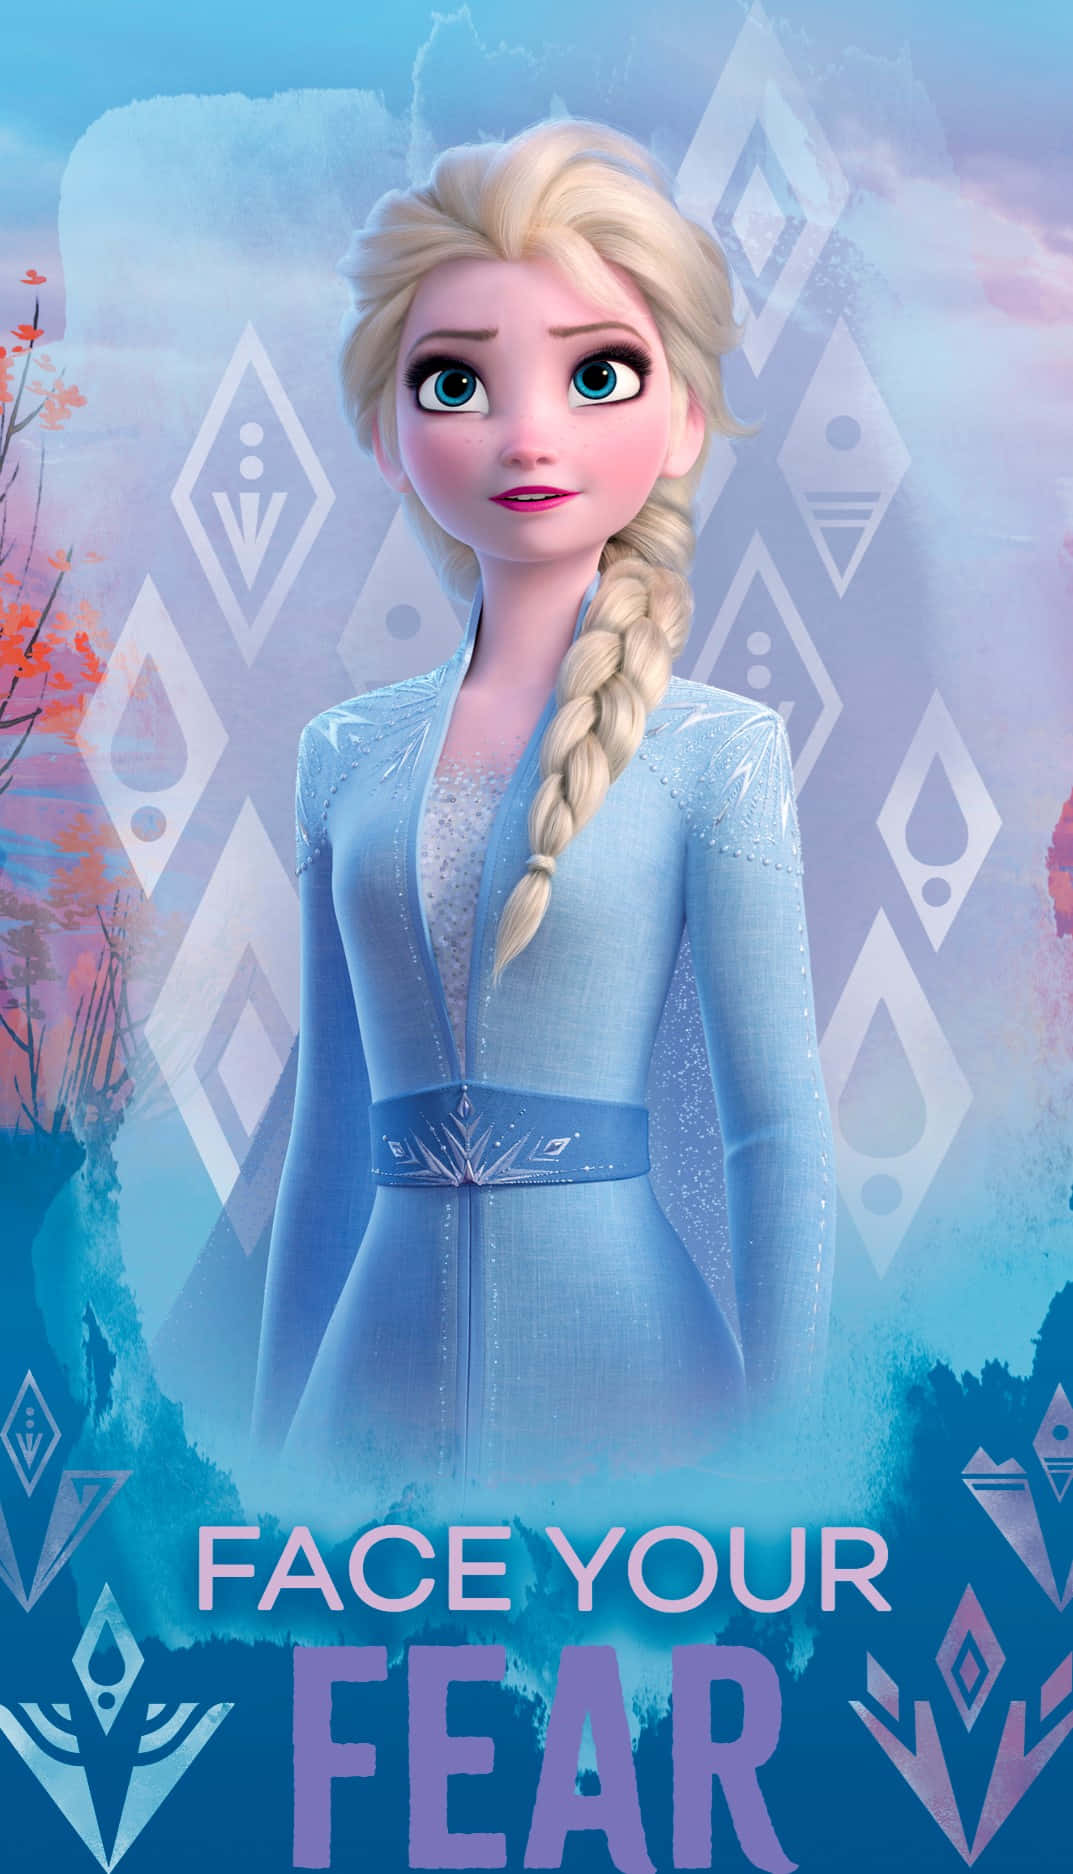 Queen Elsa of Arendelle with ice powers.